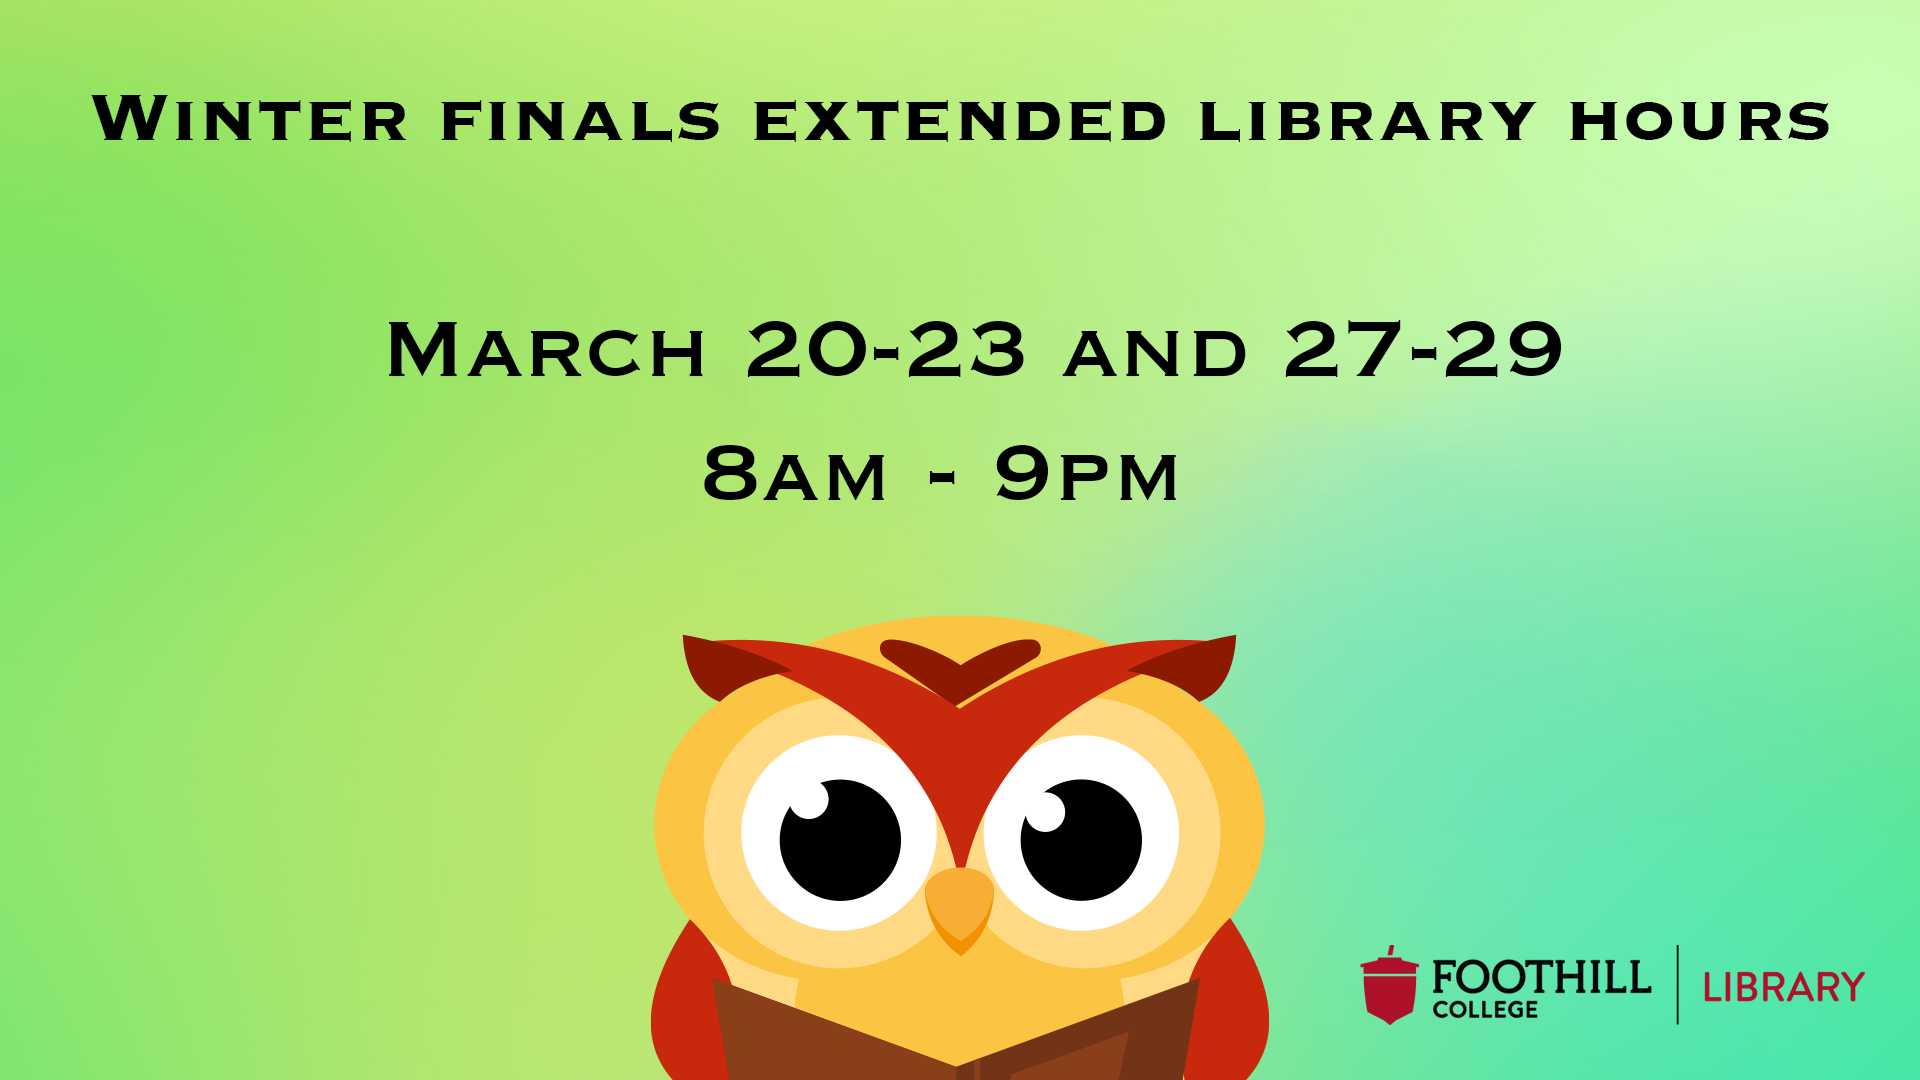 Winter finals extended library hours March 20-23 and 27-29 8 am to 9 pm